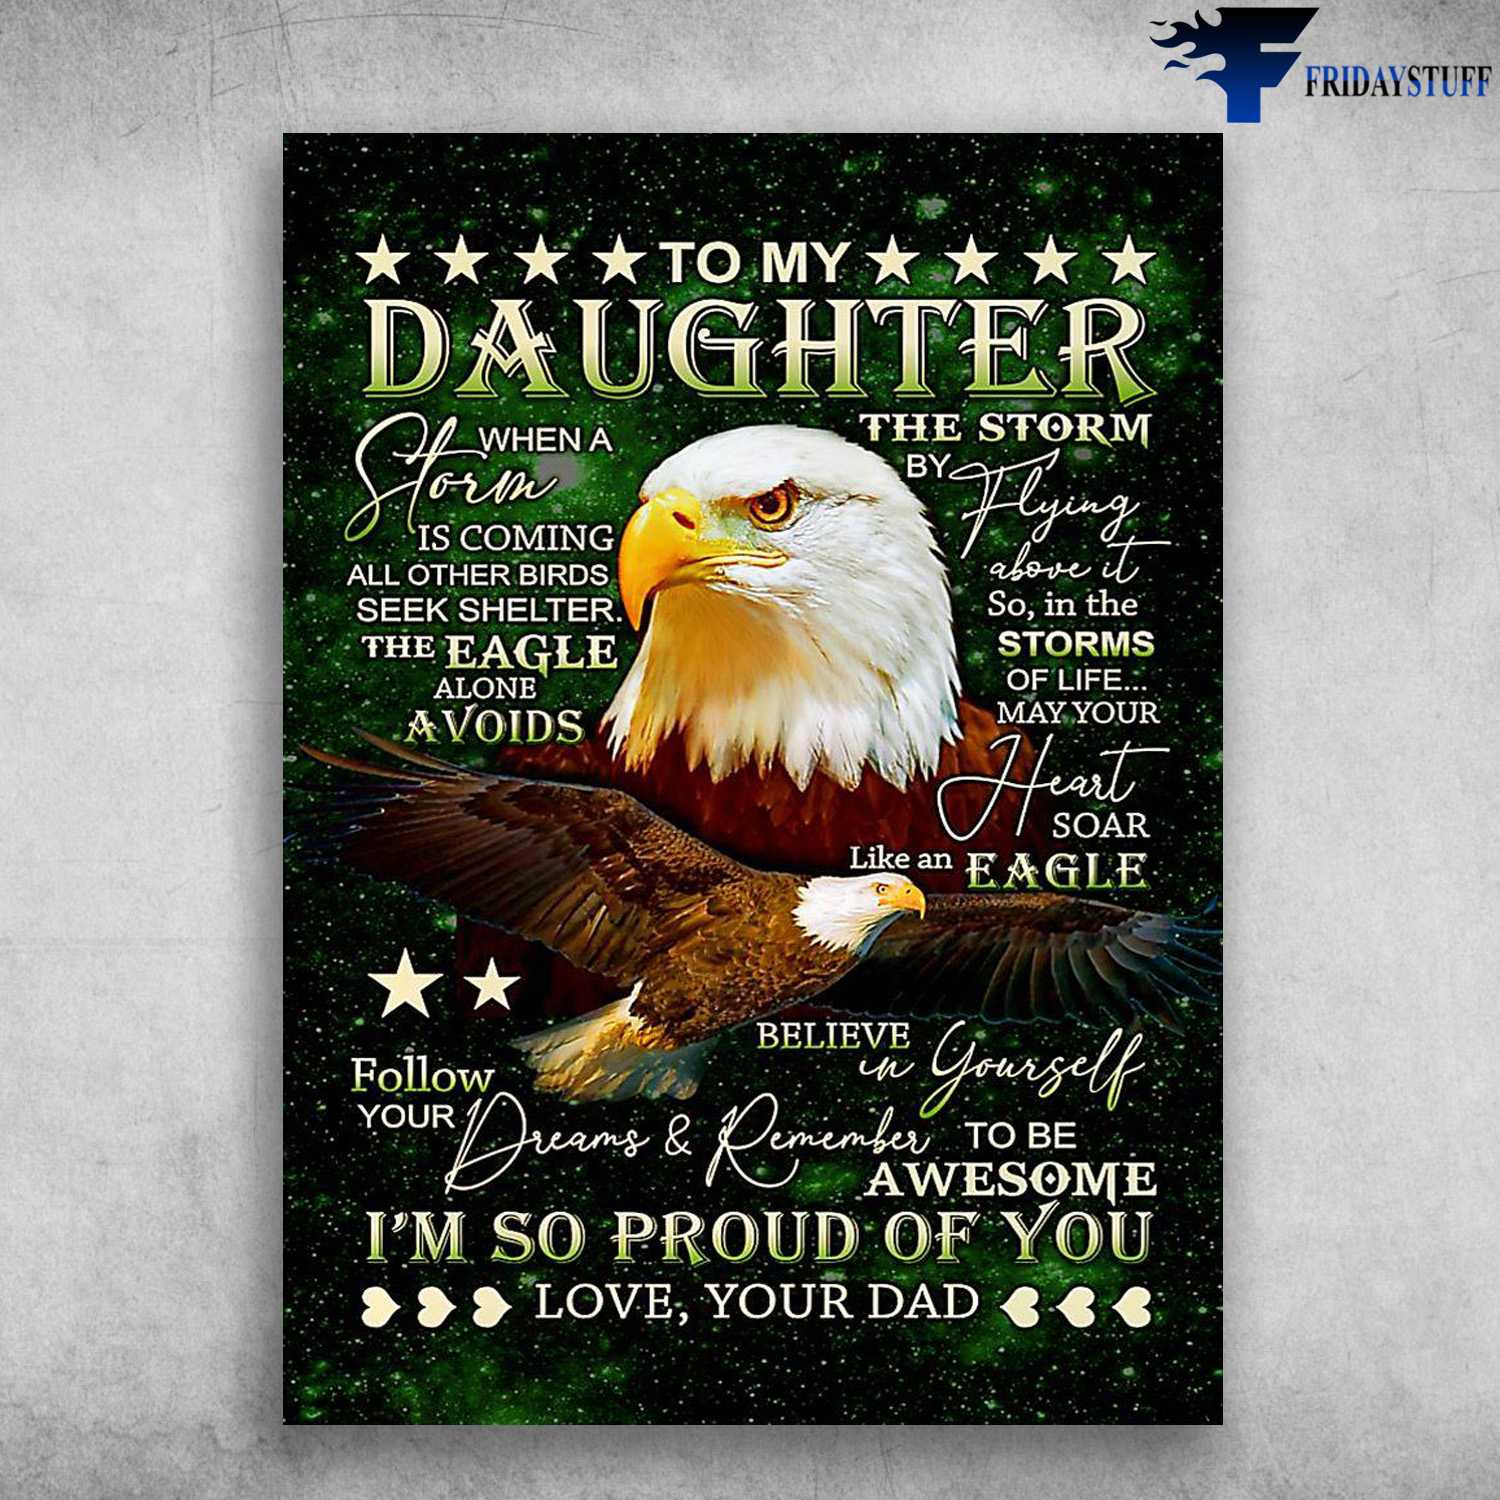 Dad And Daughter, To My Daughter, Eagle Poster, To My Daughter, When A Storm Is Coming, All Other Birds Seek Shelter, The Eagle Alone A Voids